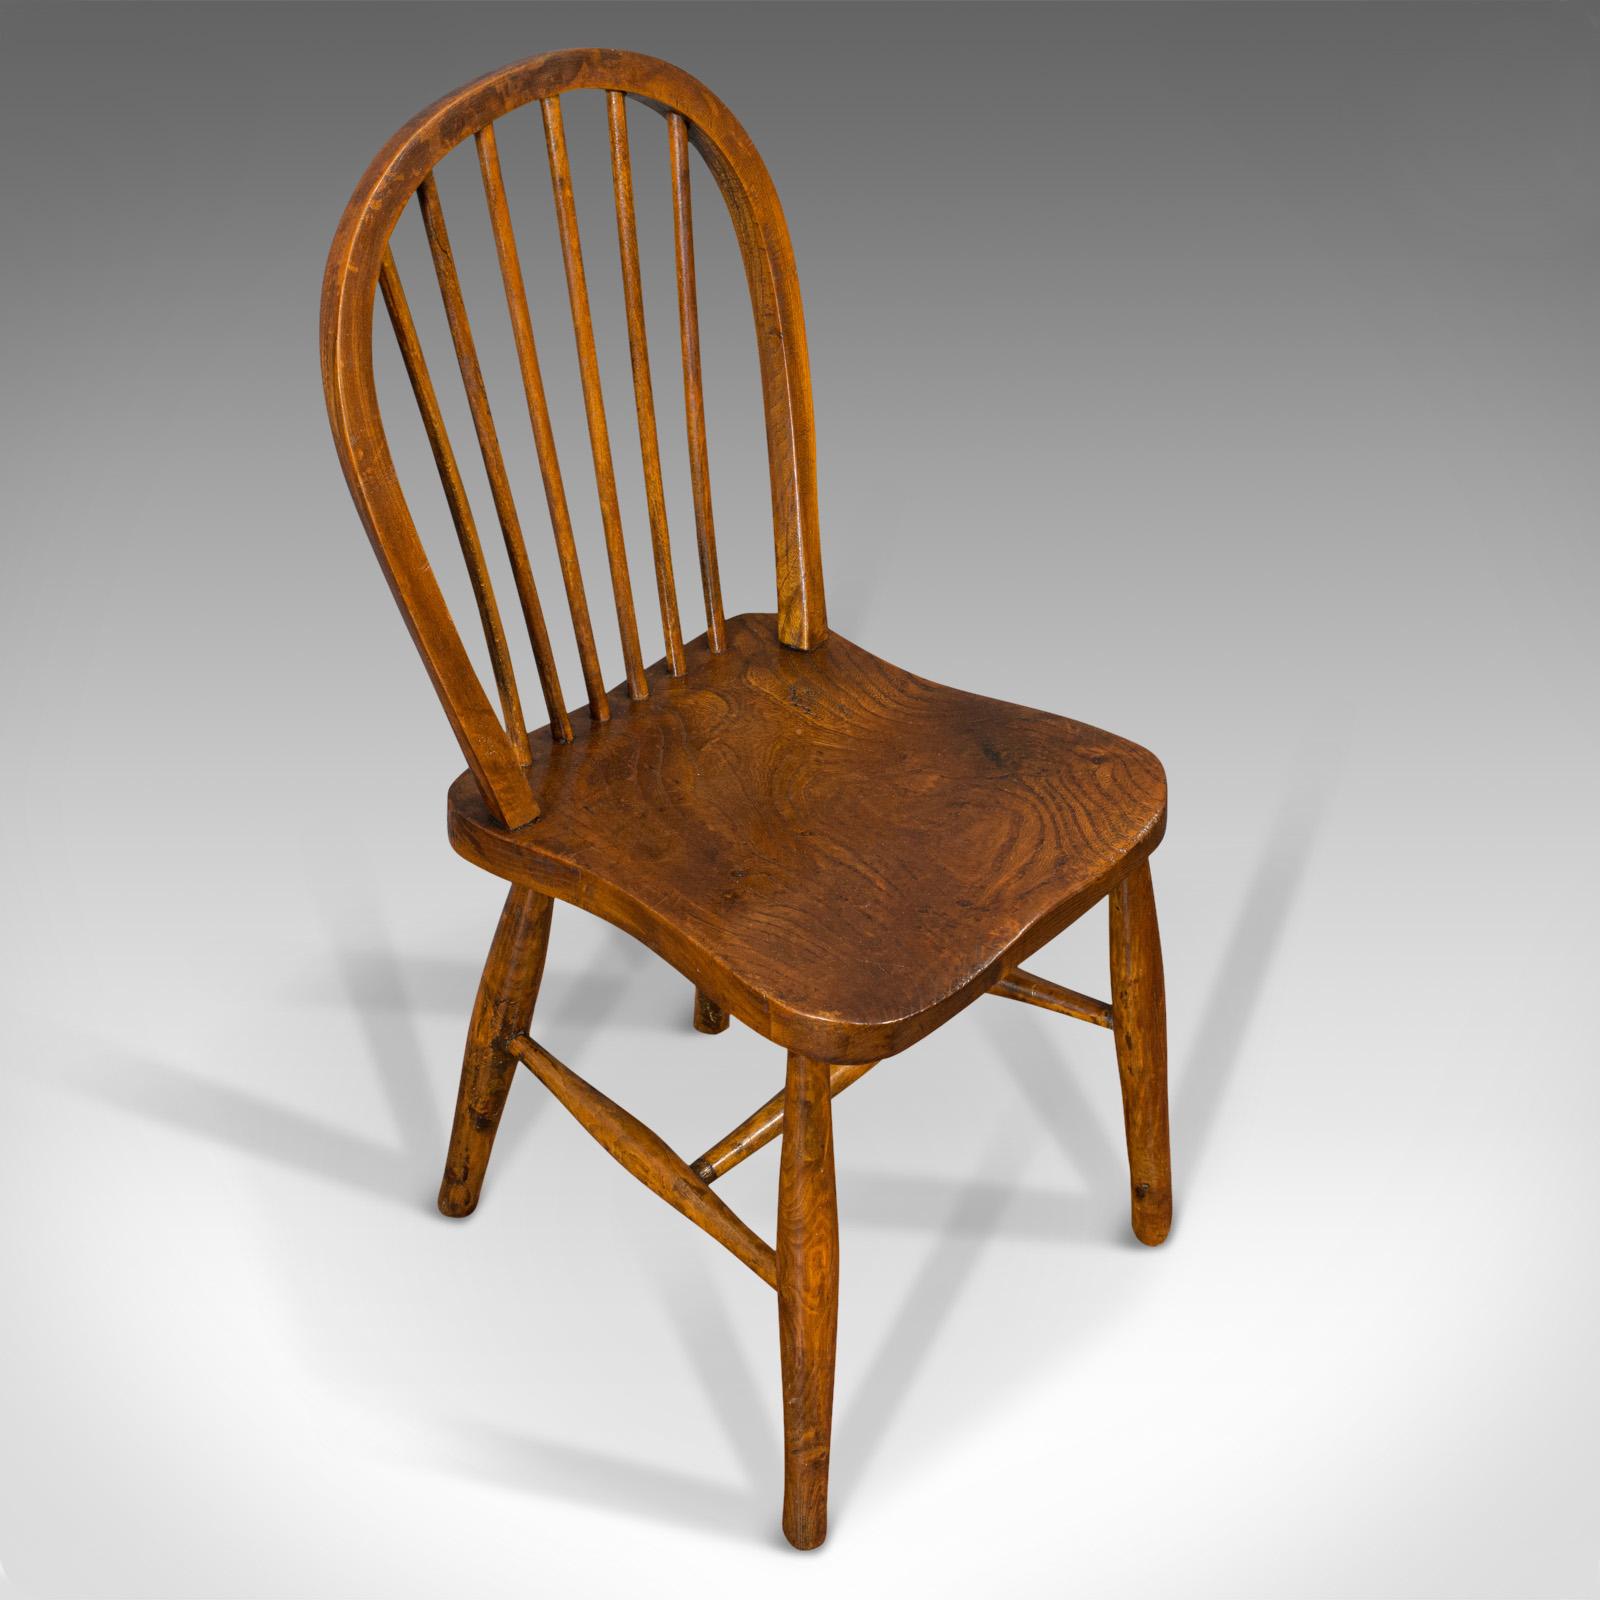 20th Century Antique Stick Back Chair, English, Elm, Beech, Station Seat, Victorian